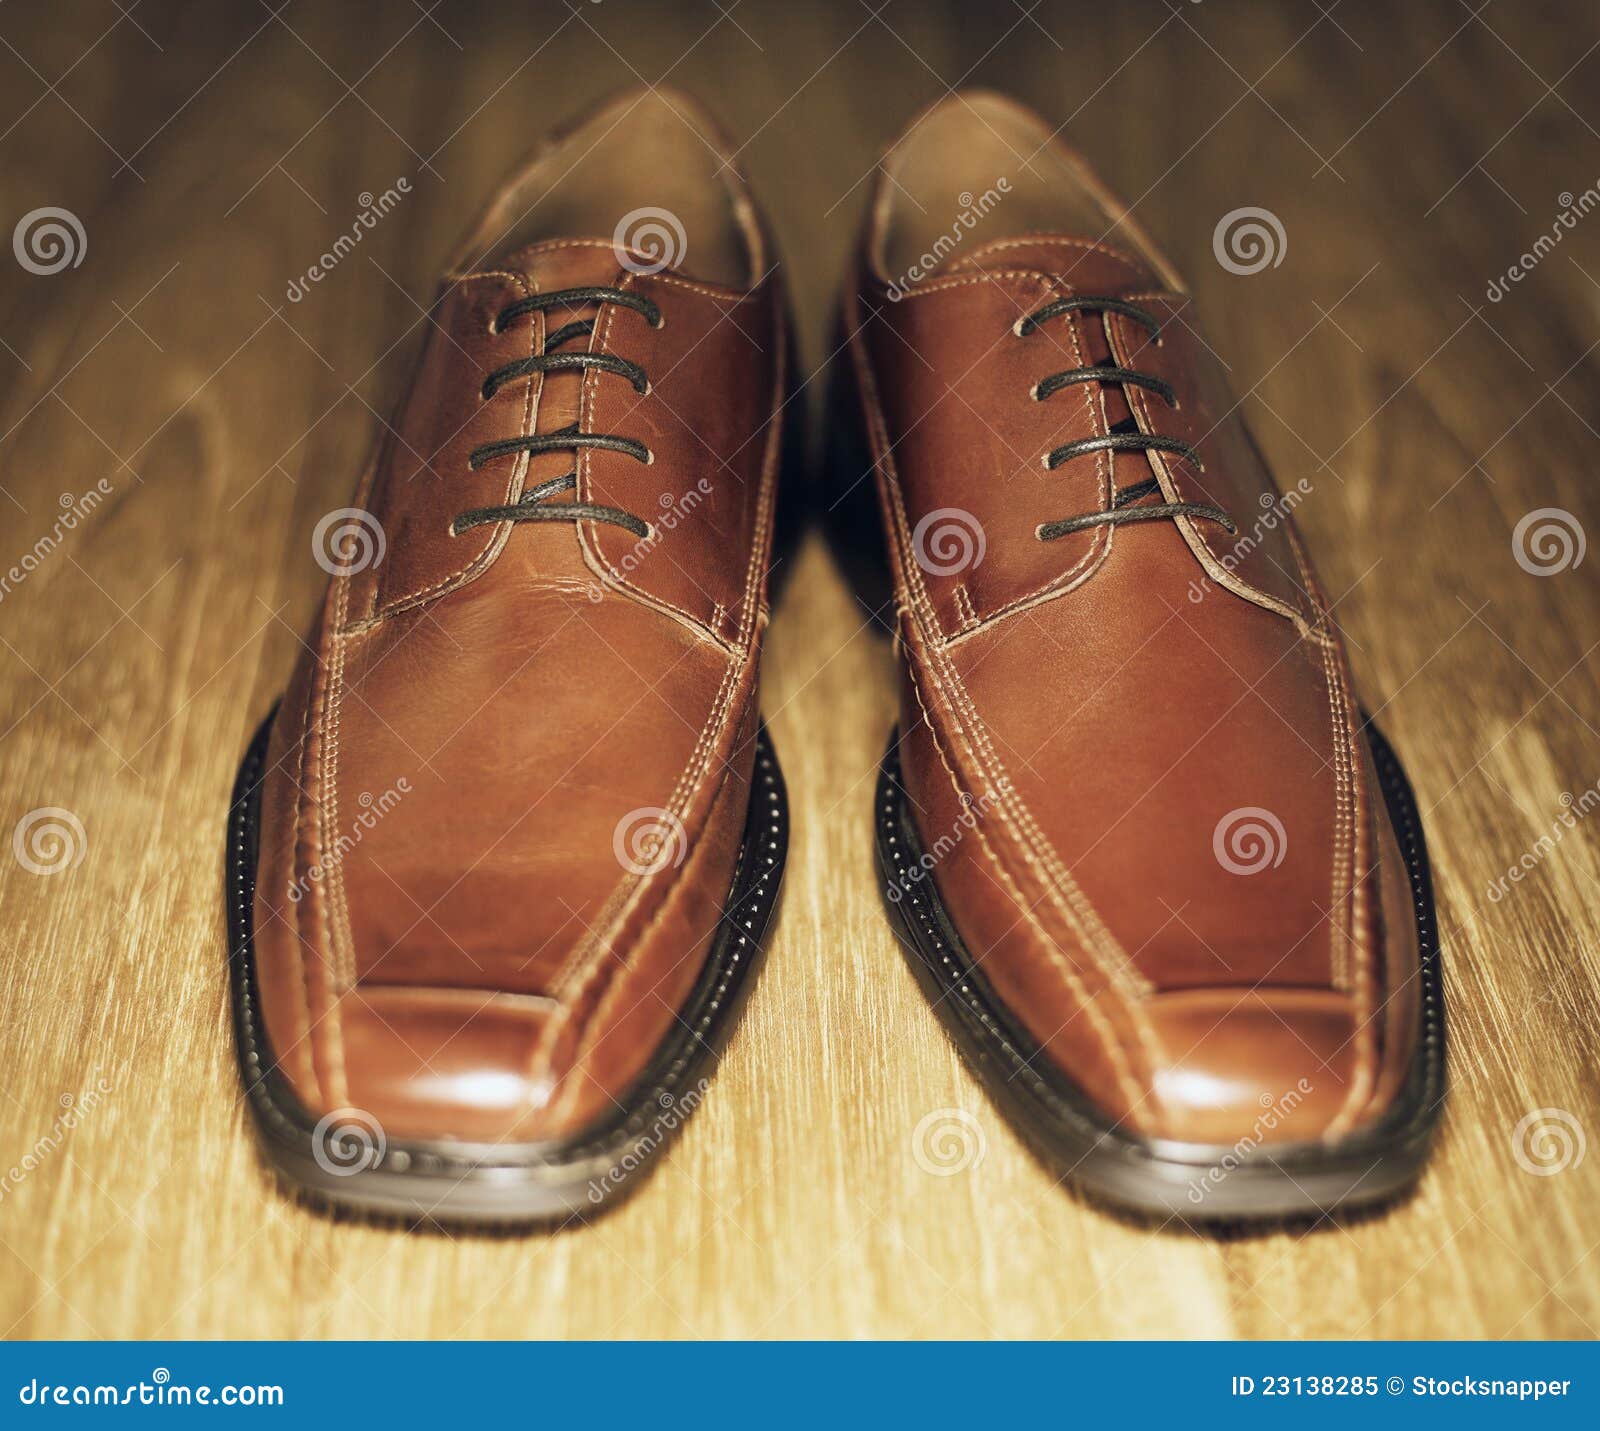 Brown Shoes stock image. Image of fashion, objects, mens - 23138285